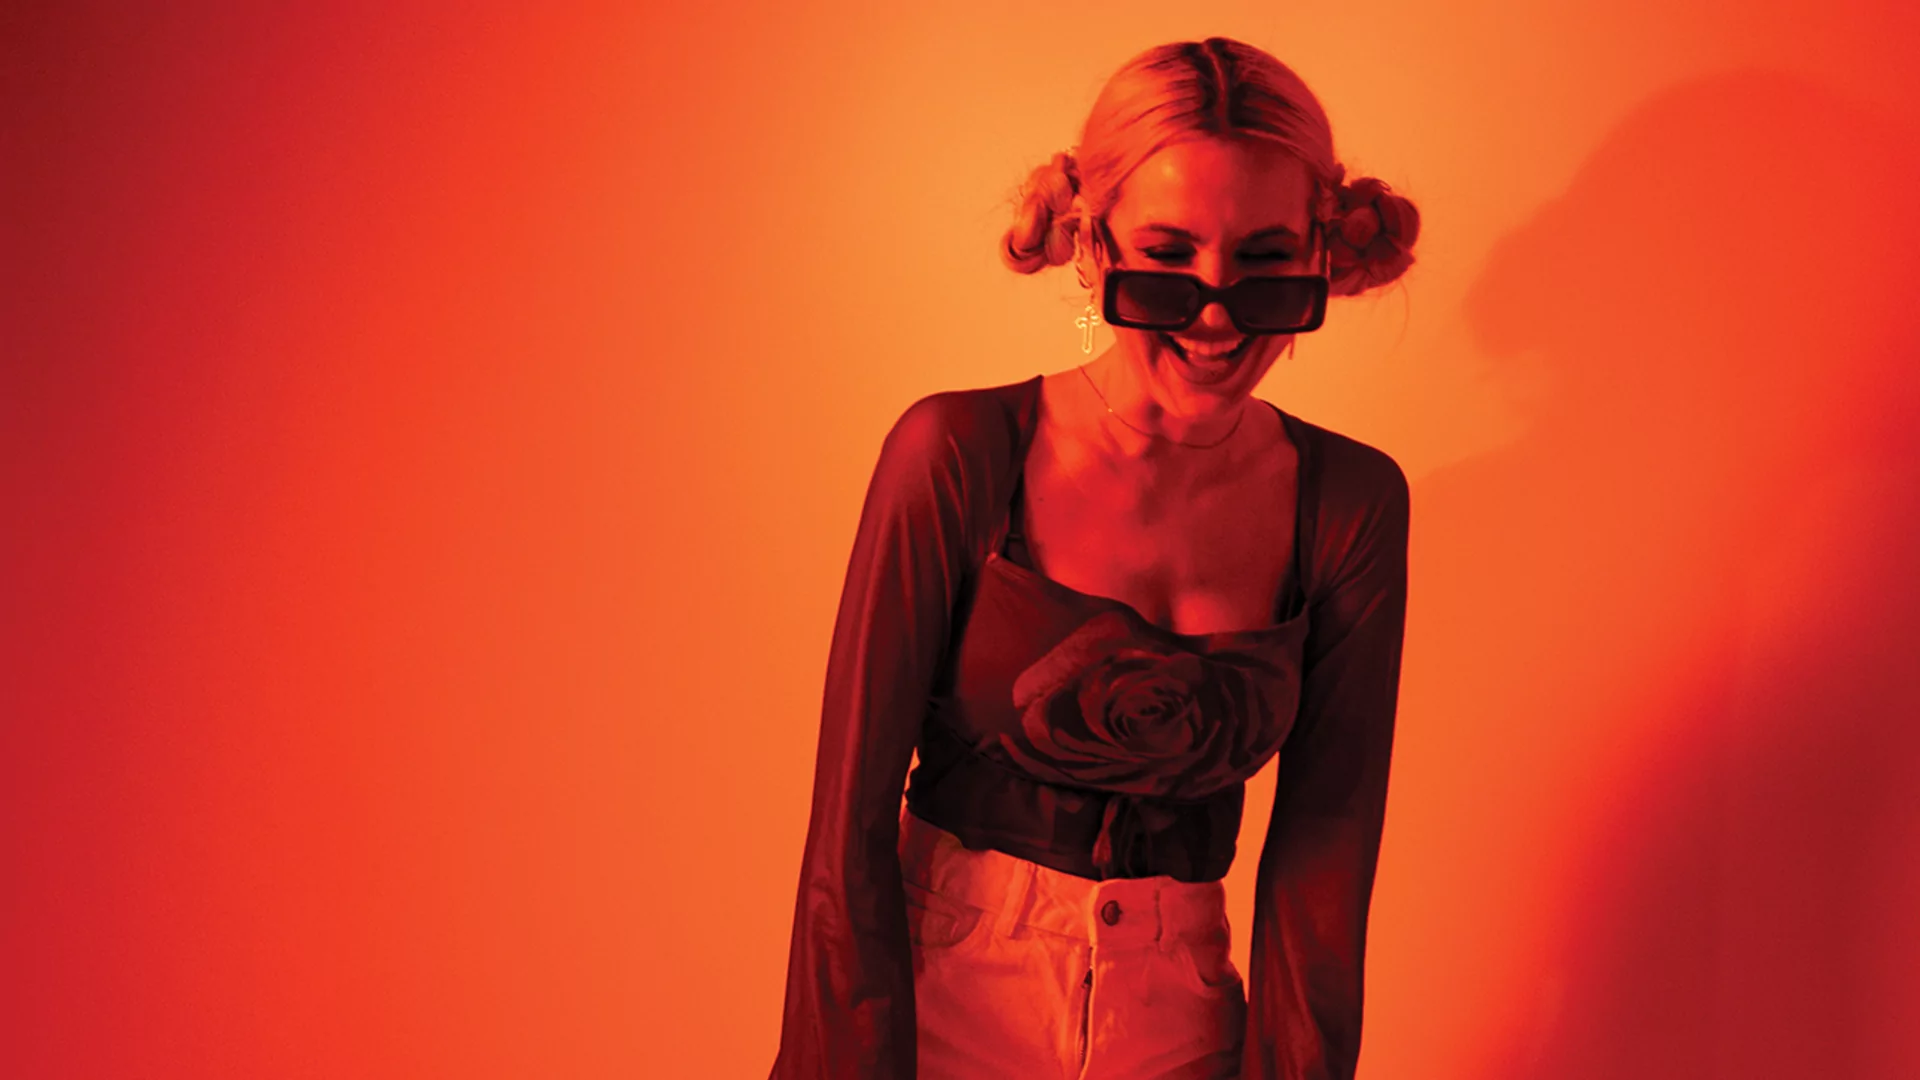 Leena Punks posing in a red and orange-lit room. She's laughing. Her hair is tied up in buns and she's wearing sunglasses